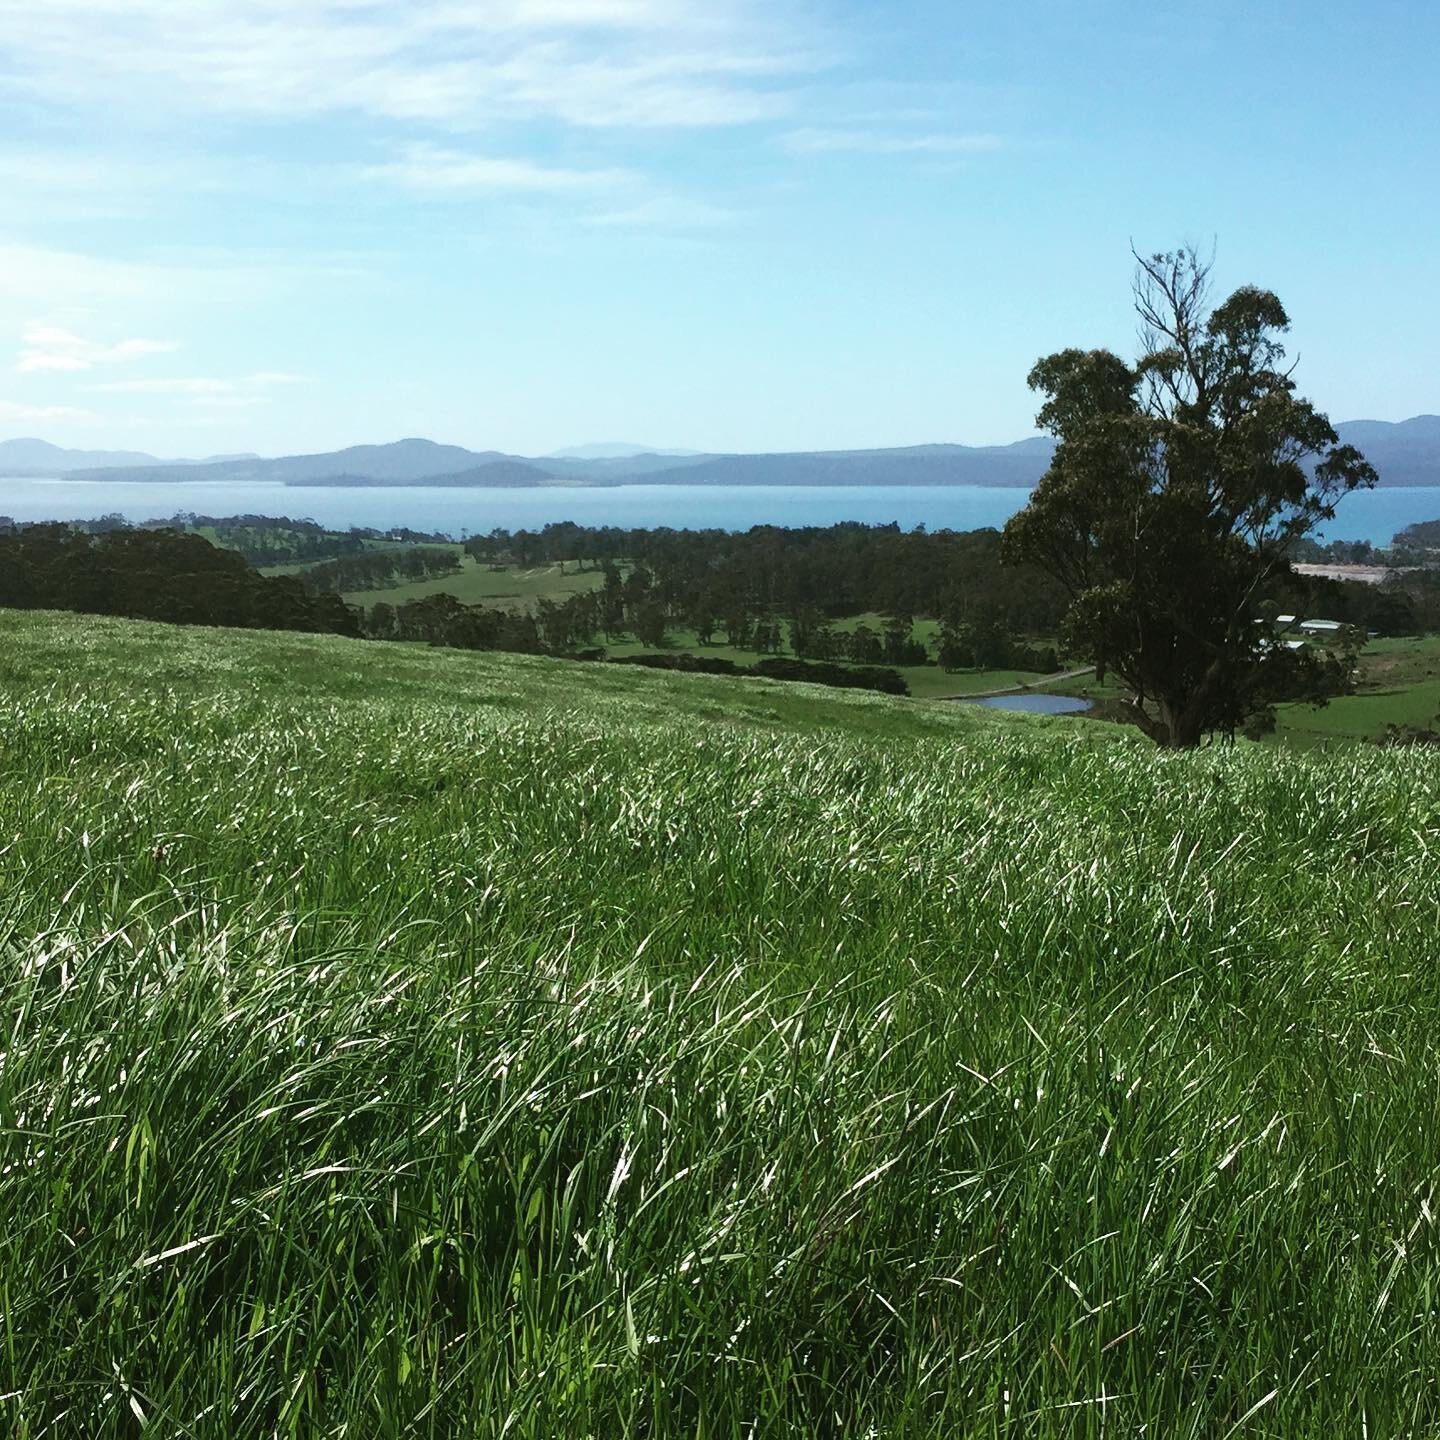 Spring grass on Premaydena Hill 💚 

This is one of our six hay paddocks. Each Spring we lock them up for about three months to grow nice long grass for hay, which is put into round bales and stored away for the next Winter. That way we can feed the 